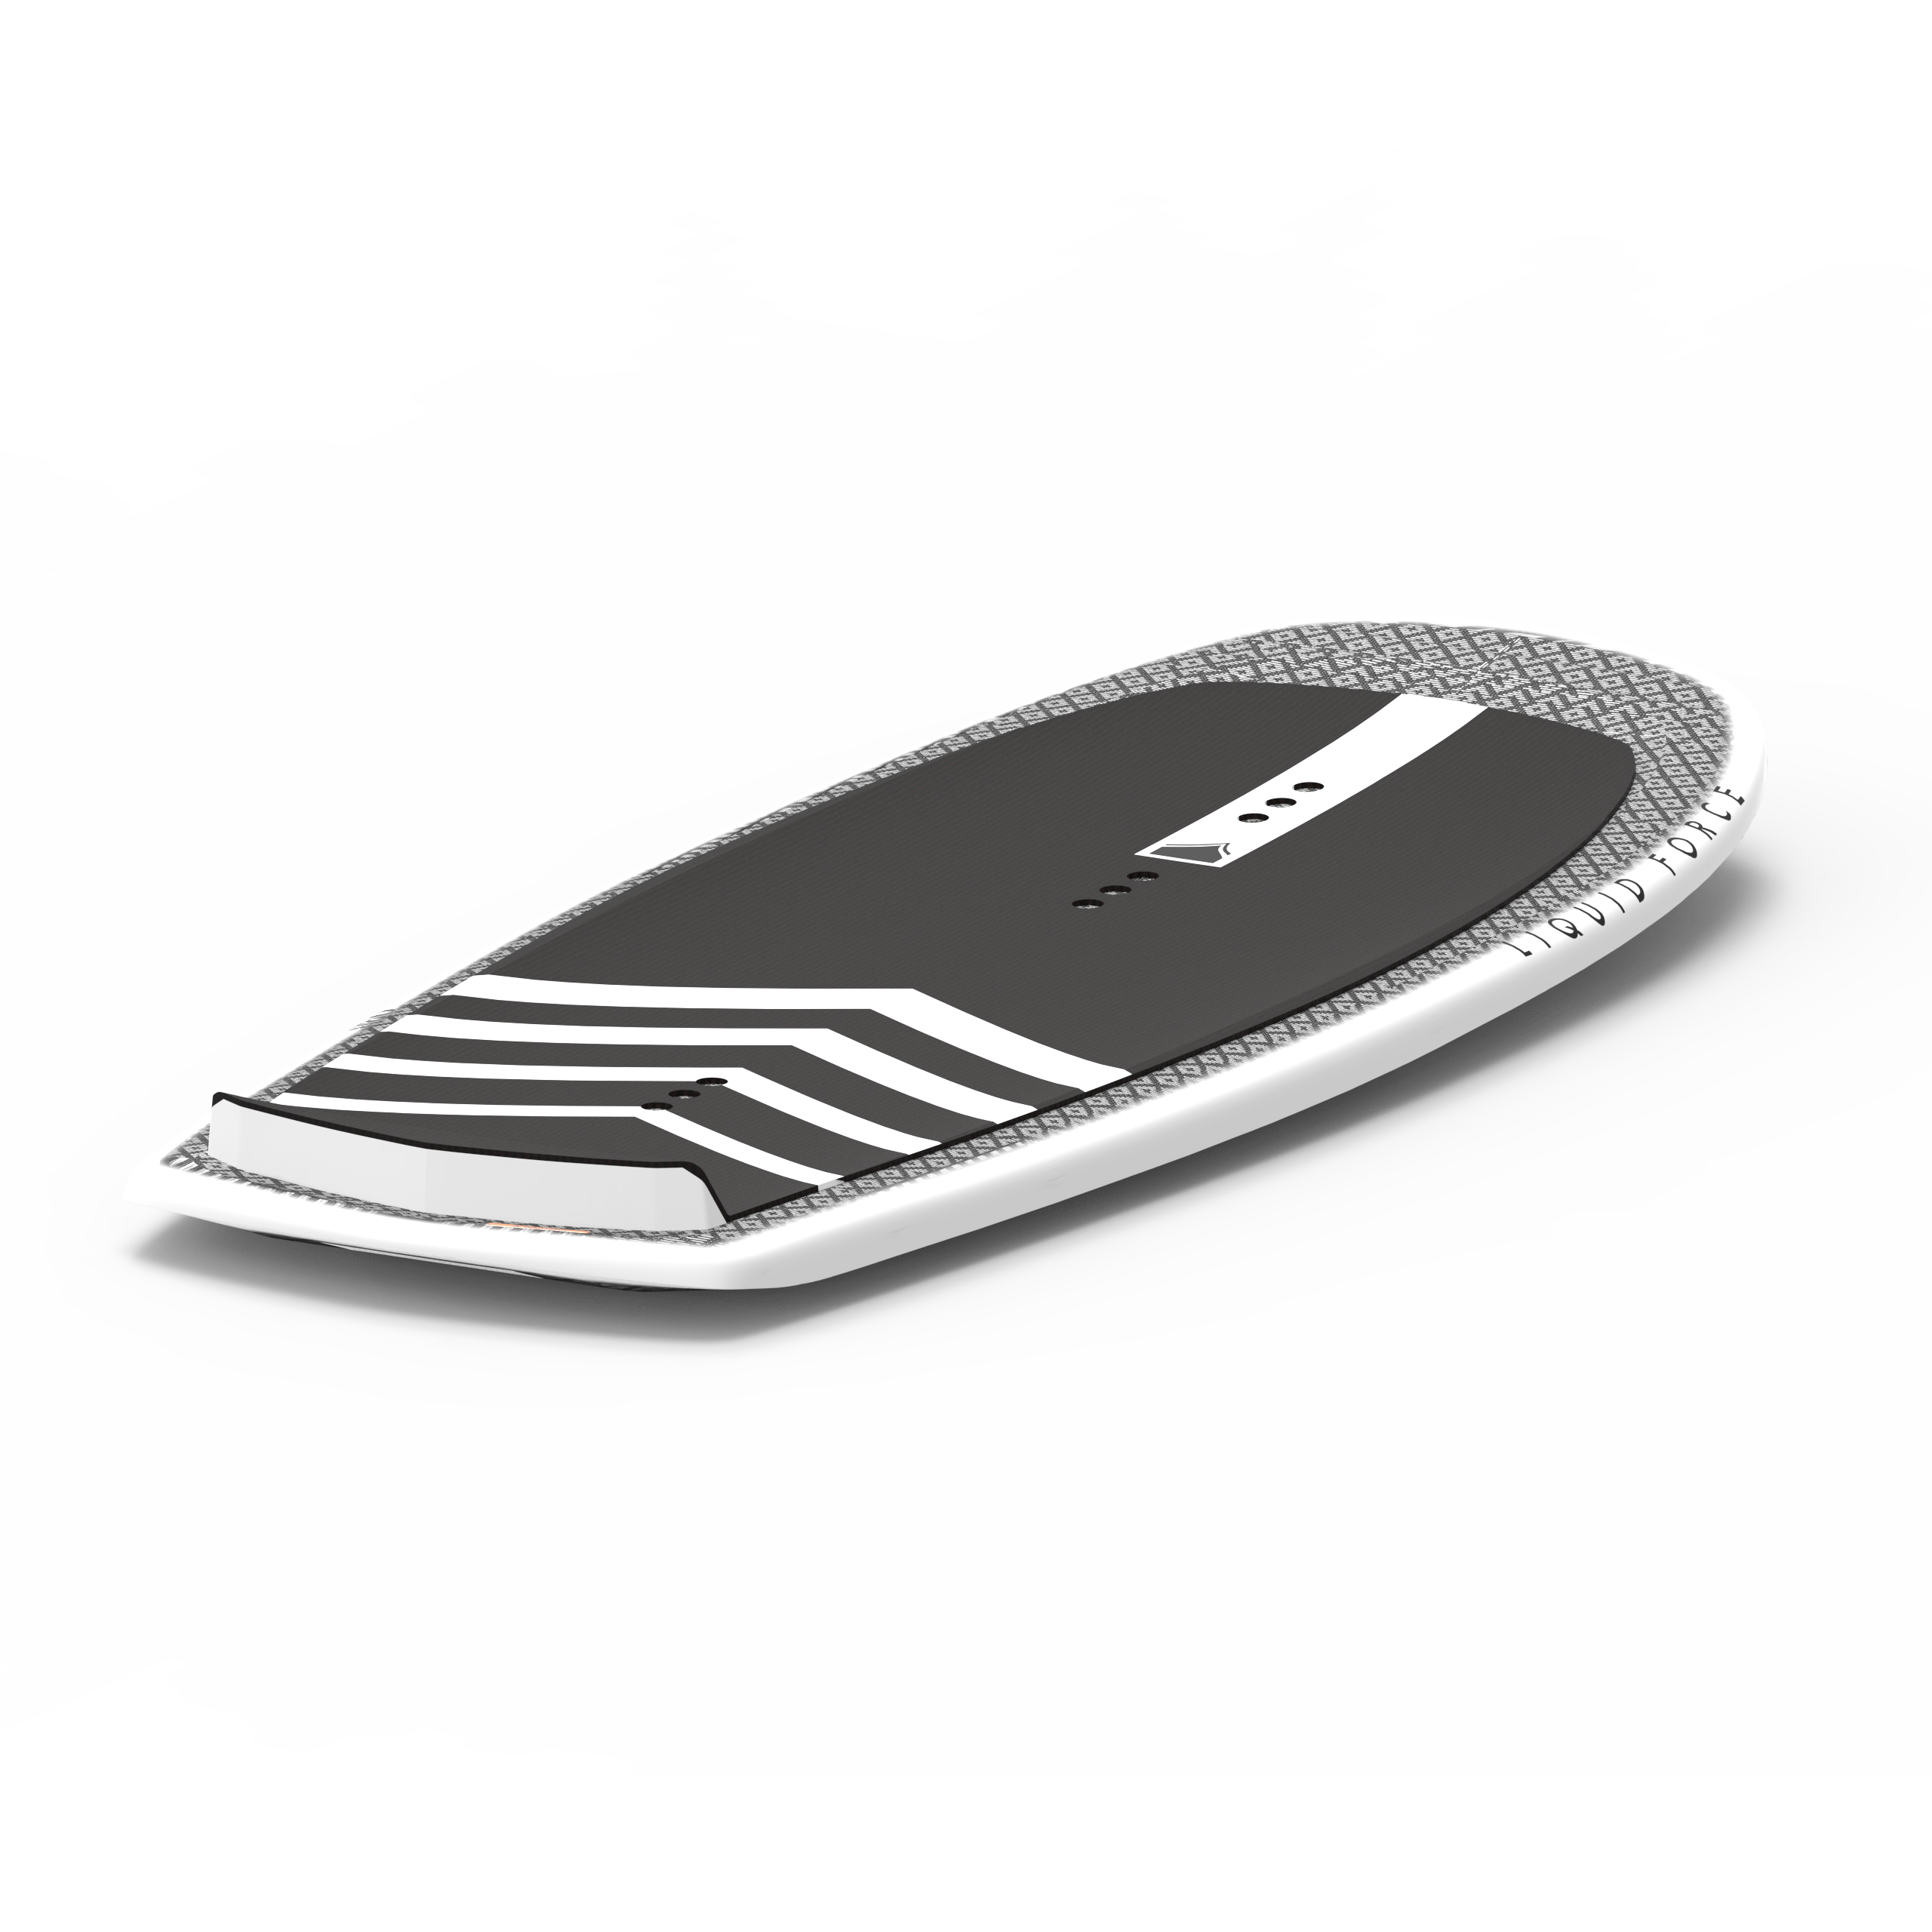 A Liquid Force 2024 Orb Foil Board with a black and white design featuring a corduroy deck pad.